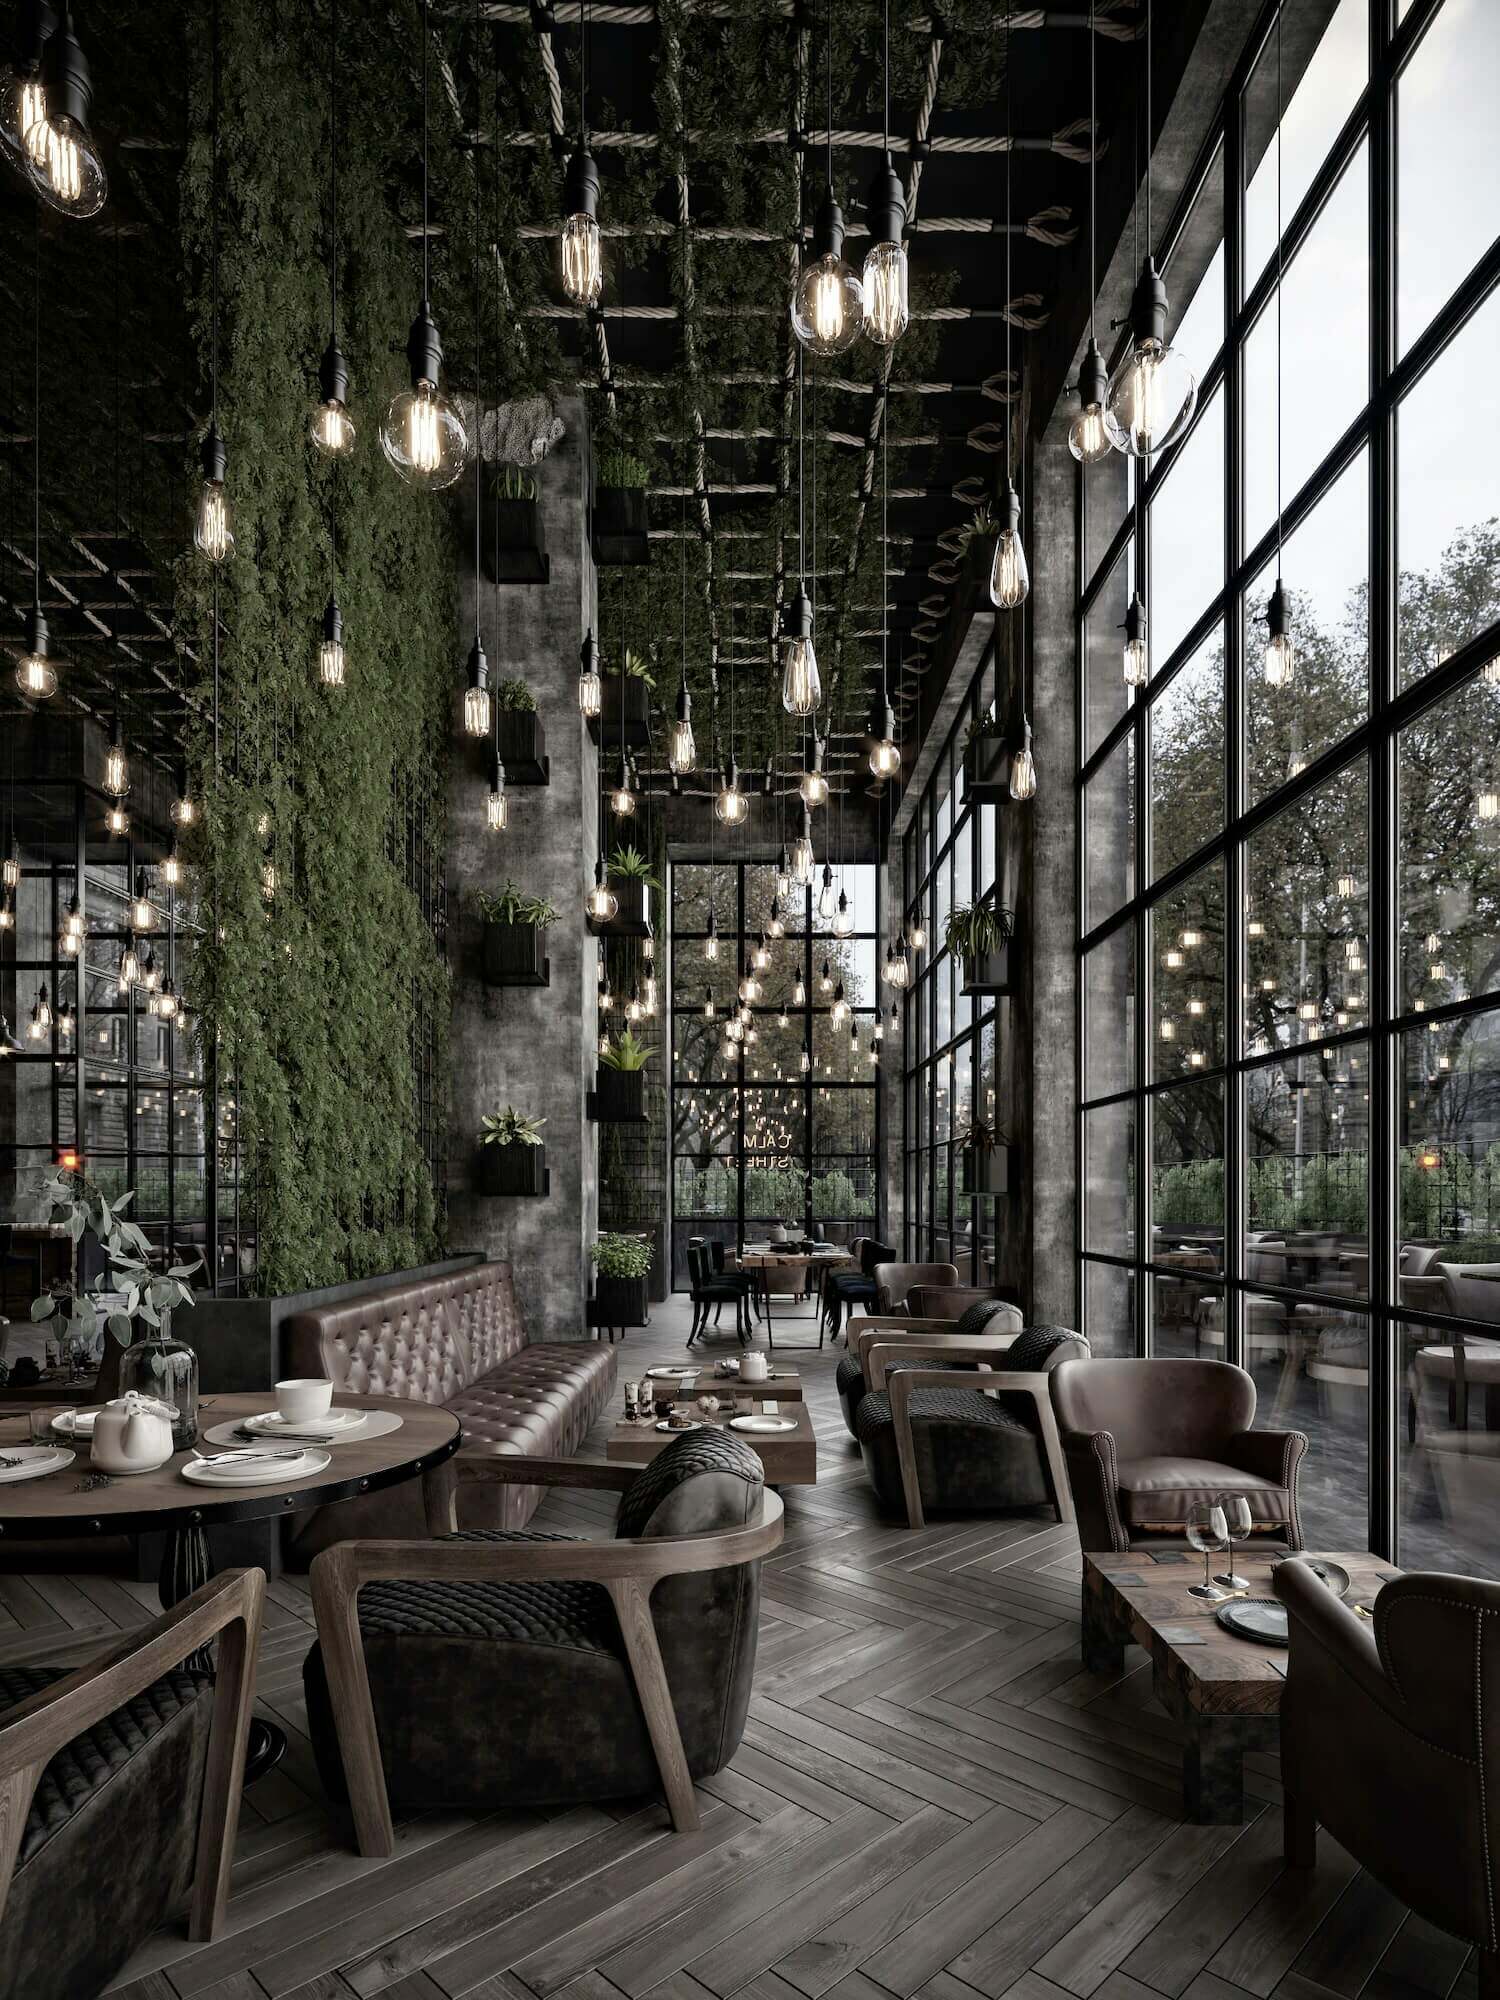 Calm Street Cafe In Doha, Qatar, By M.serhat Sezgin And Zebrano Furniture